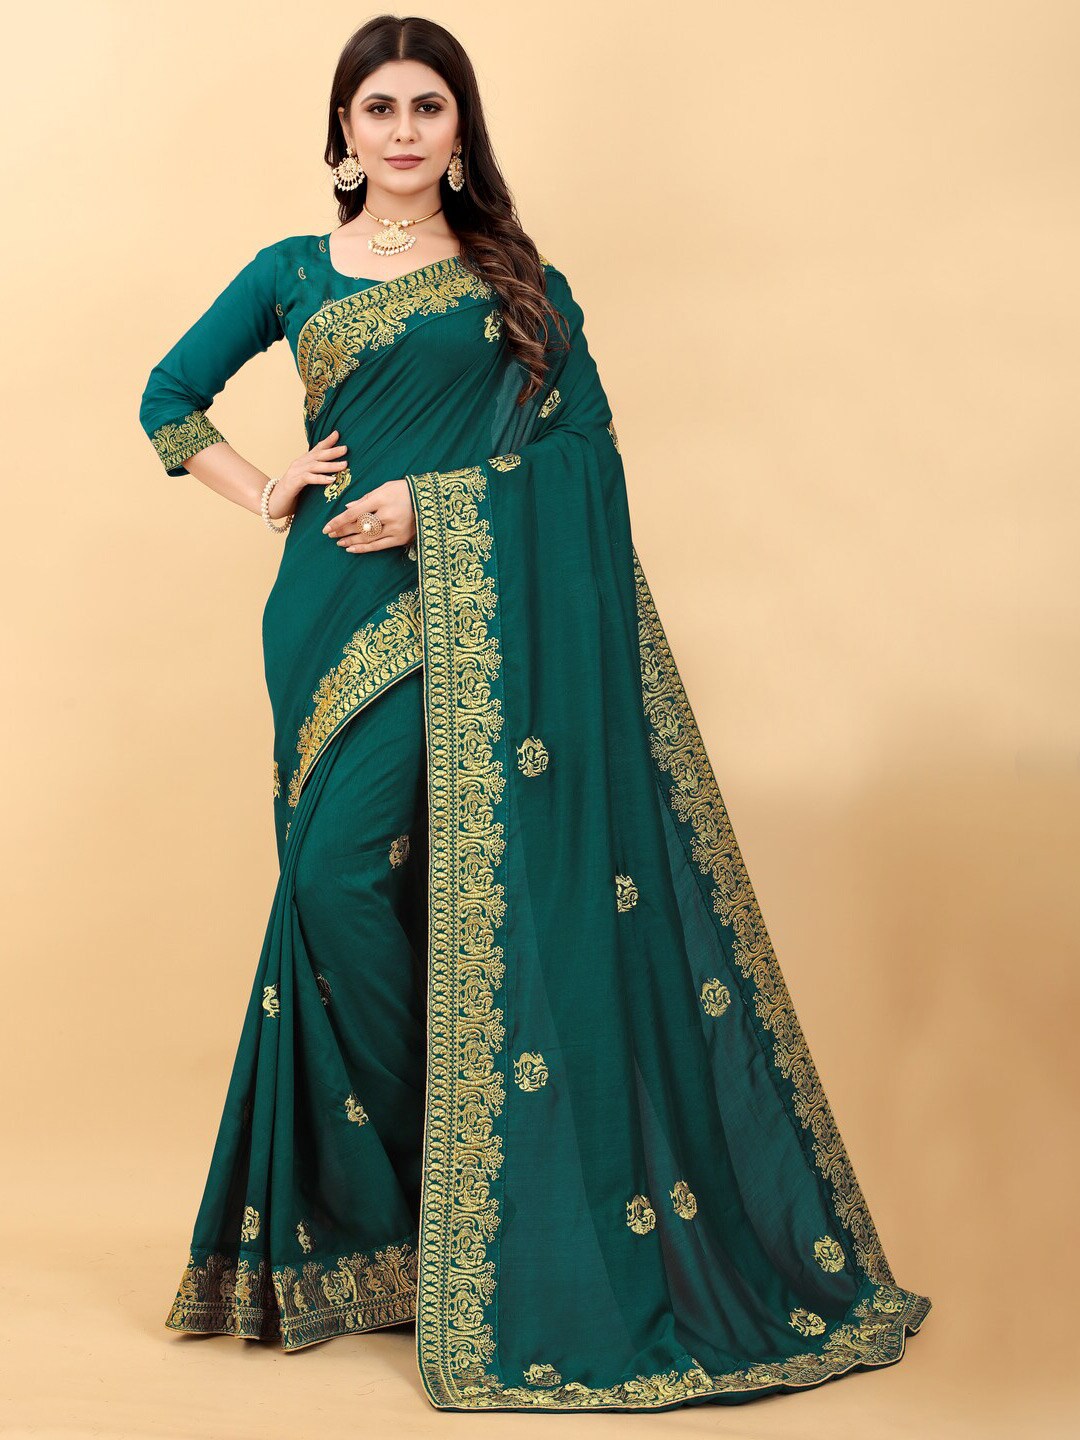 Monrav Green & Gold-Toned Floral Embroidered Silk Blend Saree Price in India